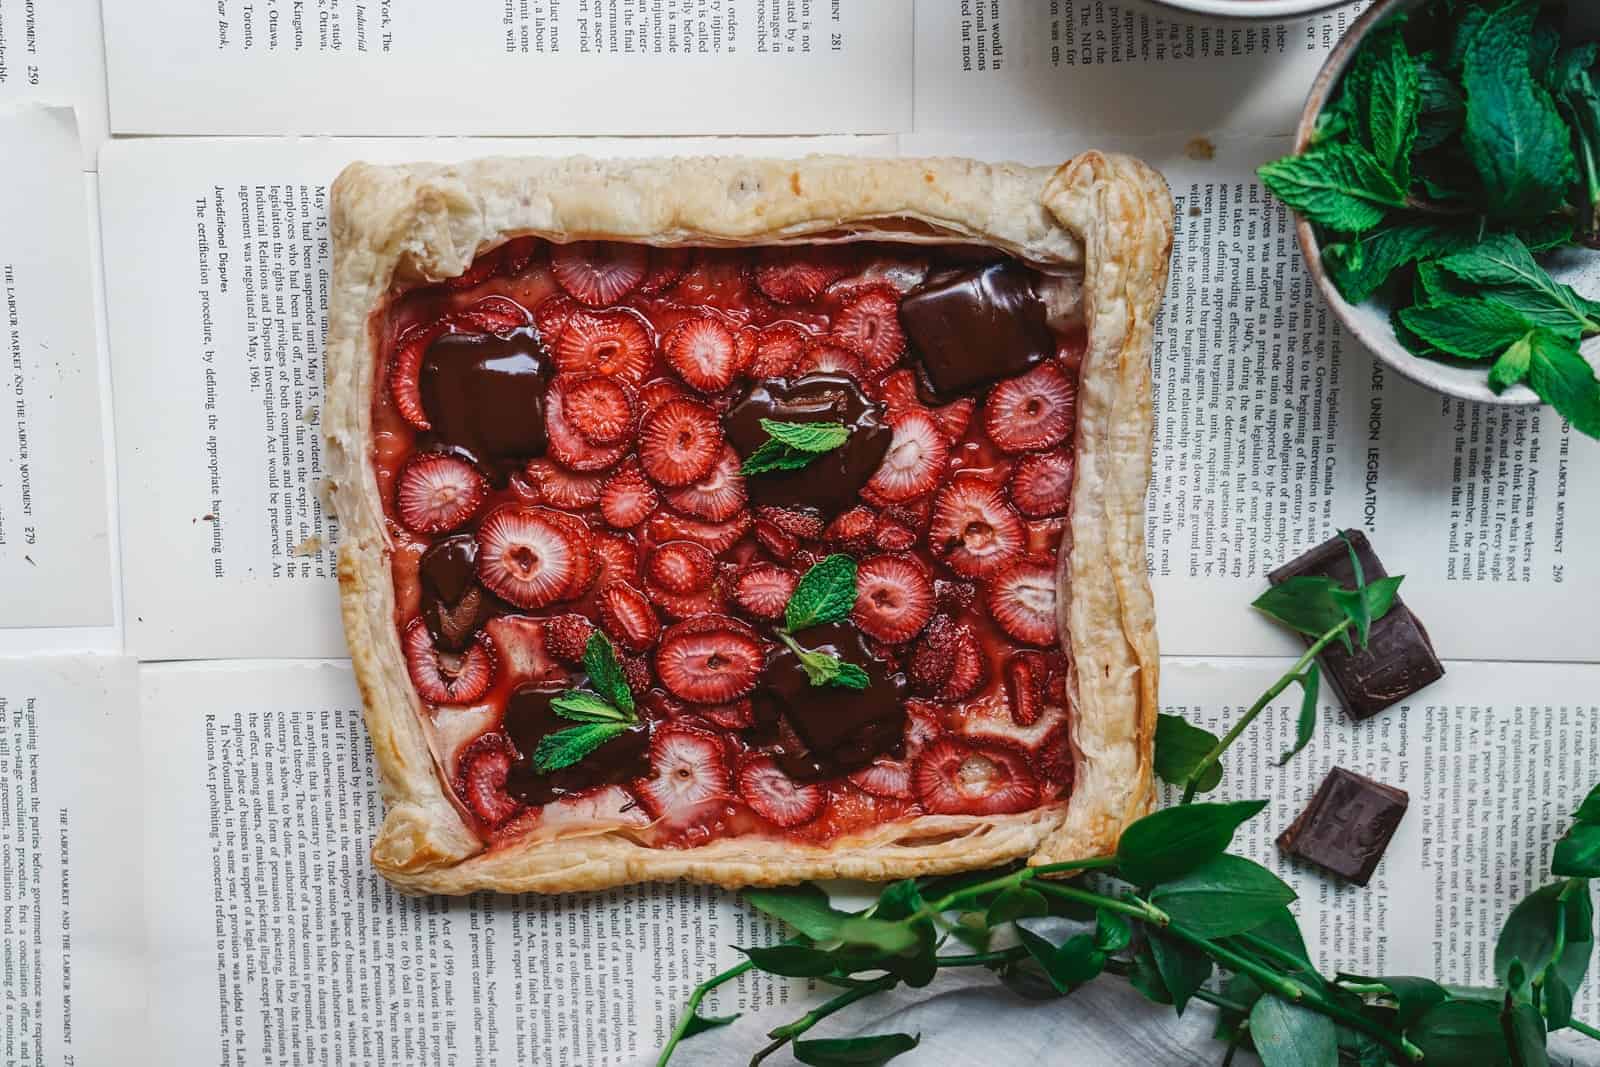 Beautiful strawberry tart on counter, surrounded by herbs. This is a great vegan easter recipe for brunch or dessert.